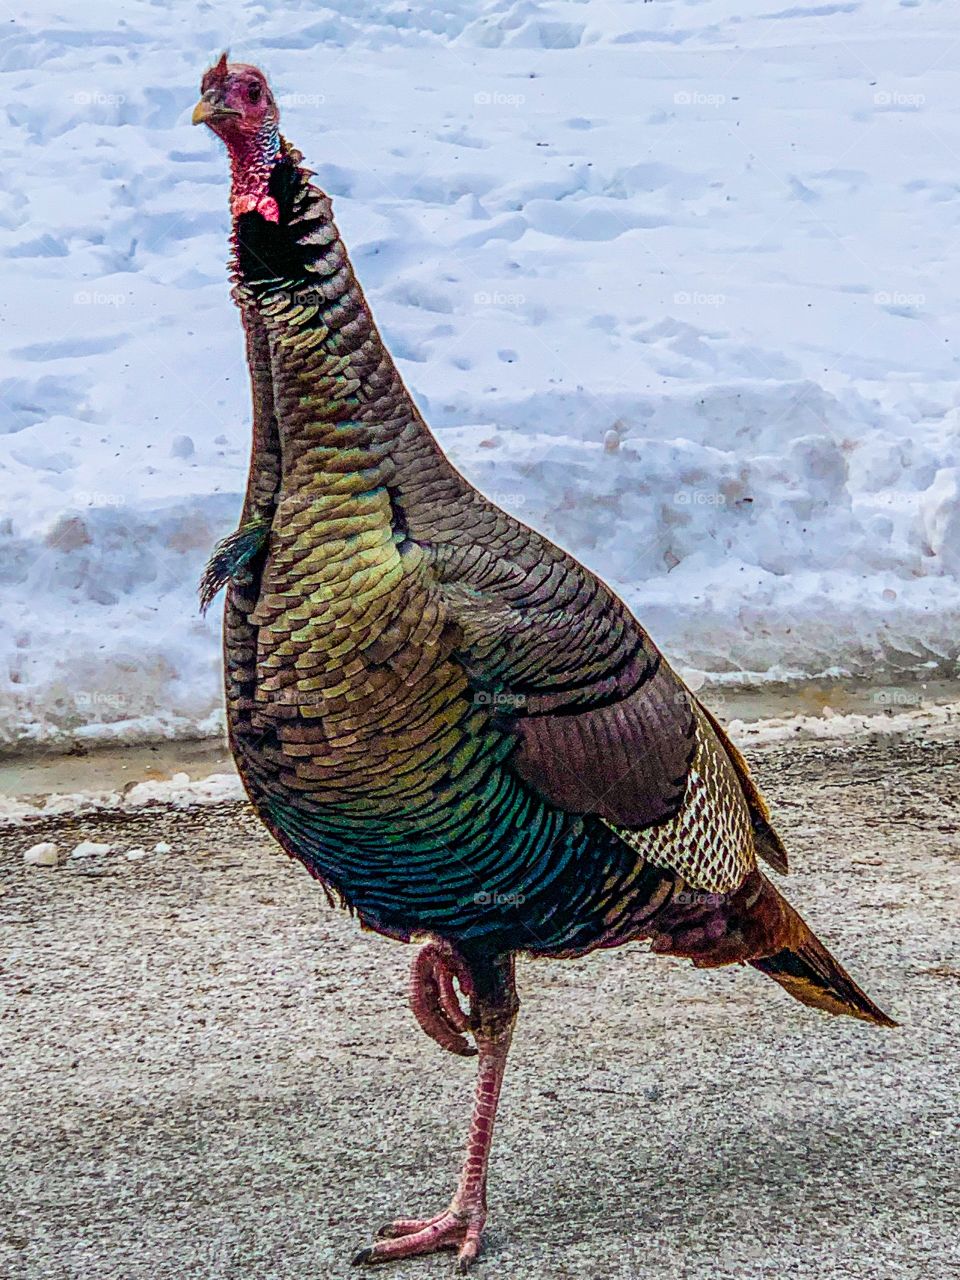 A gorgeous gobbler turkey who was kind enough to pose.